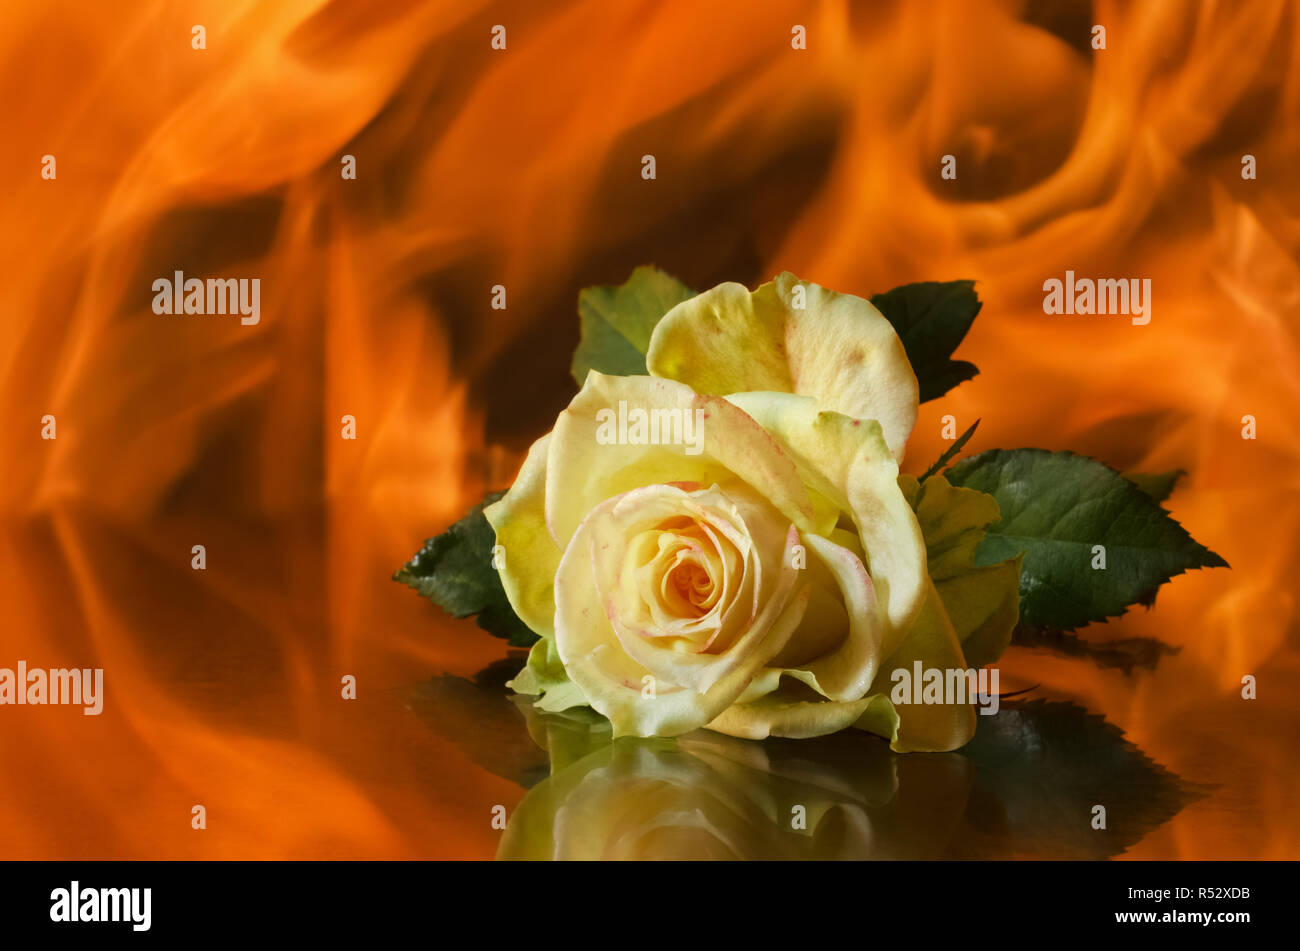 Green rose lies on the background of the flame Stock Photo